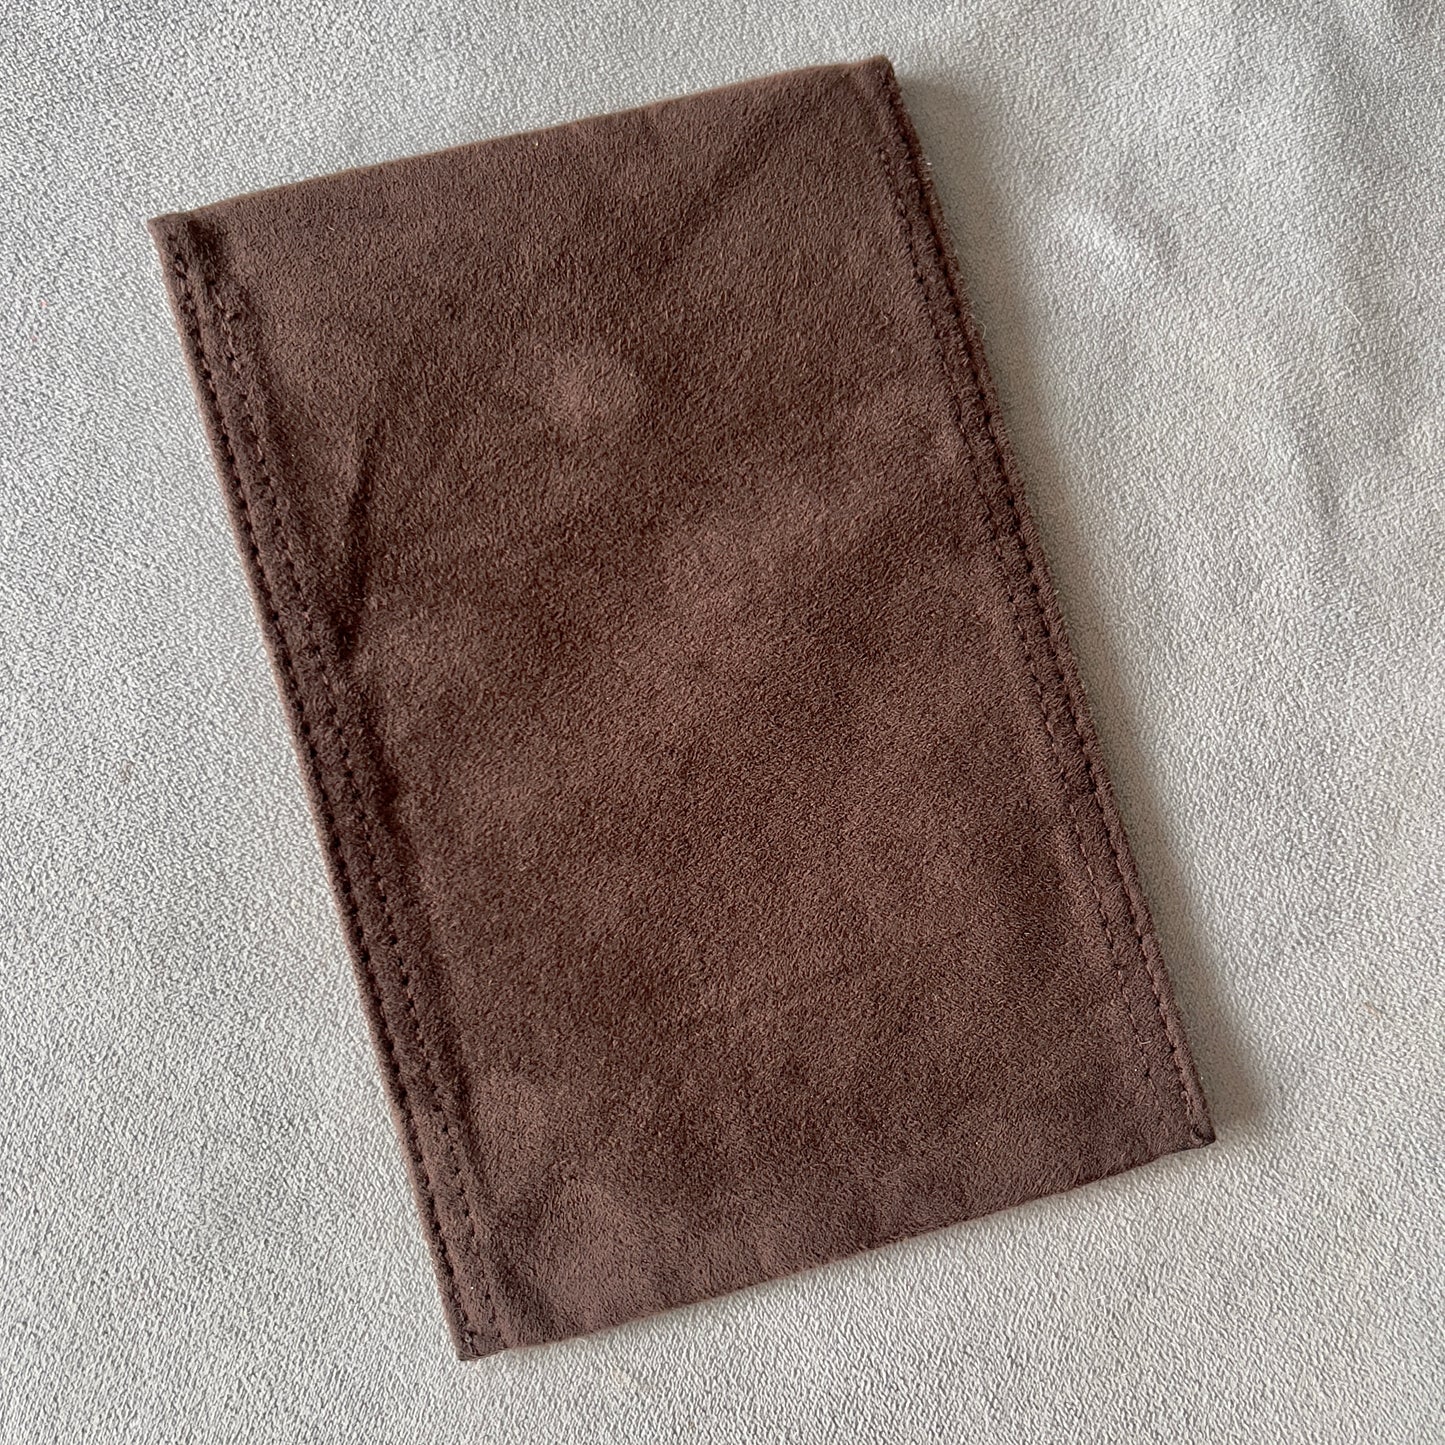 TOURNEAU Brown Faux Suede Pouch 7x4.5 inches